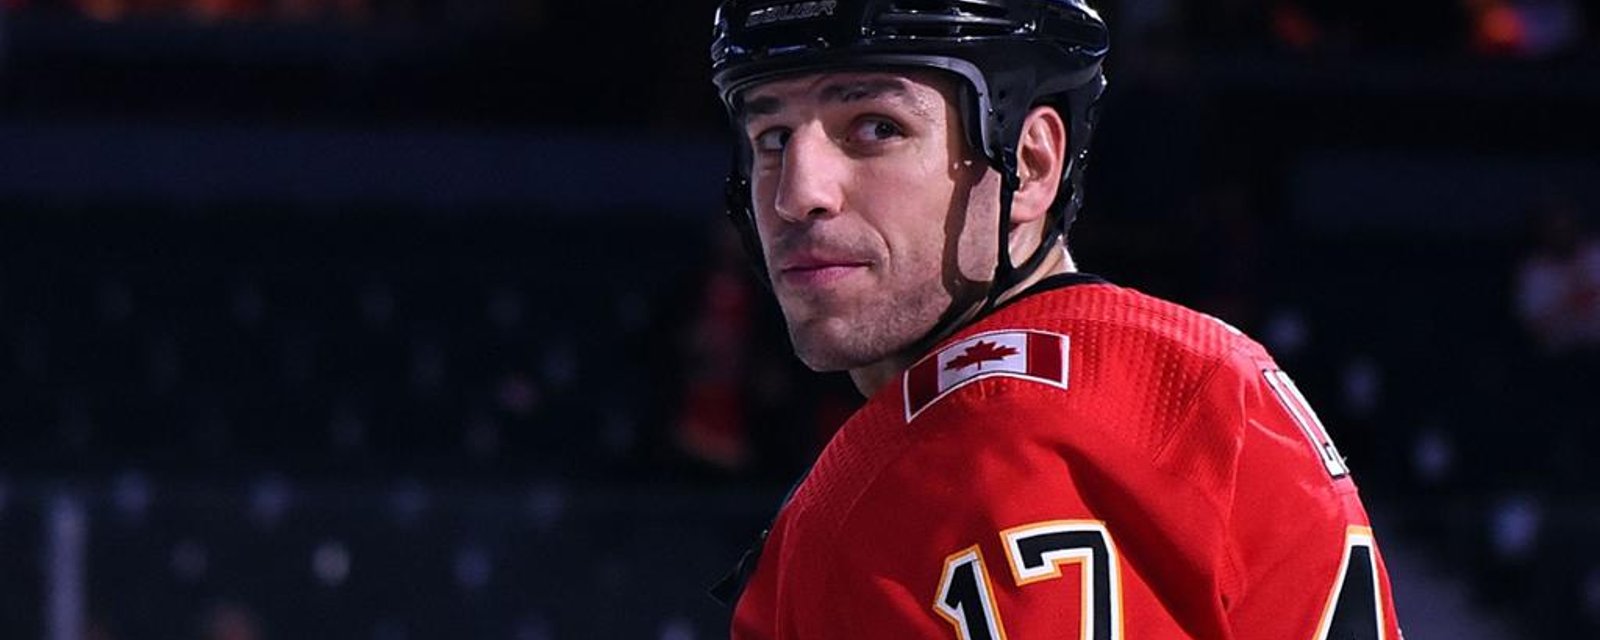 Lucic signed jersey with “Flames suck” written under his signature